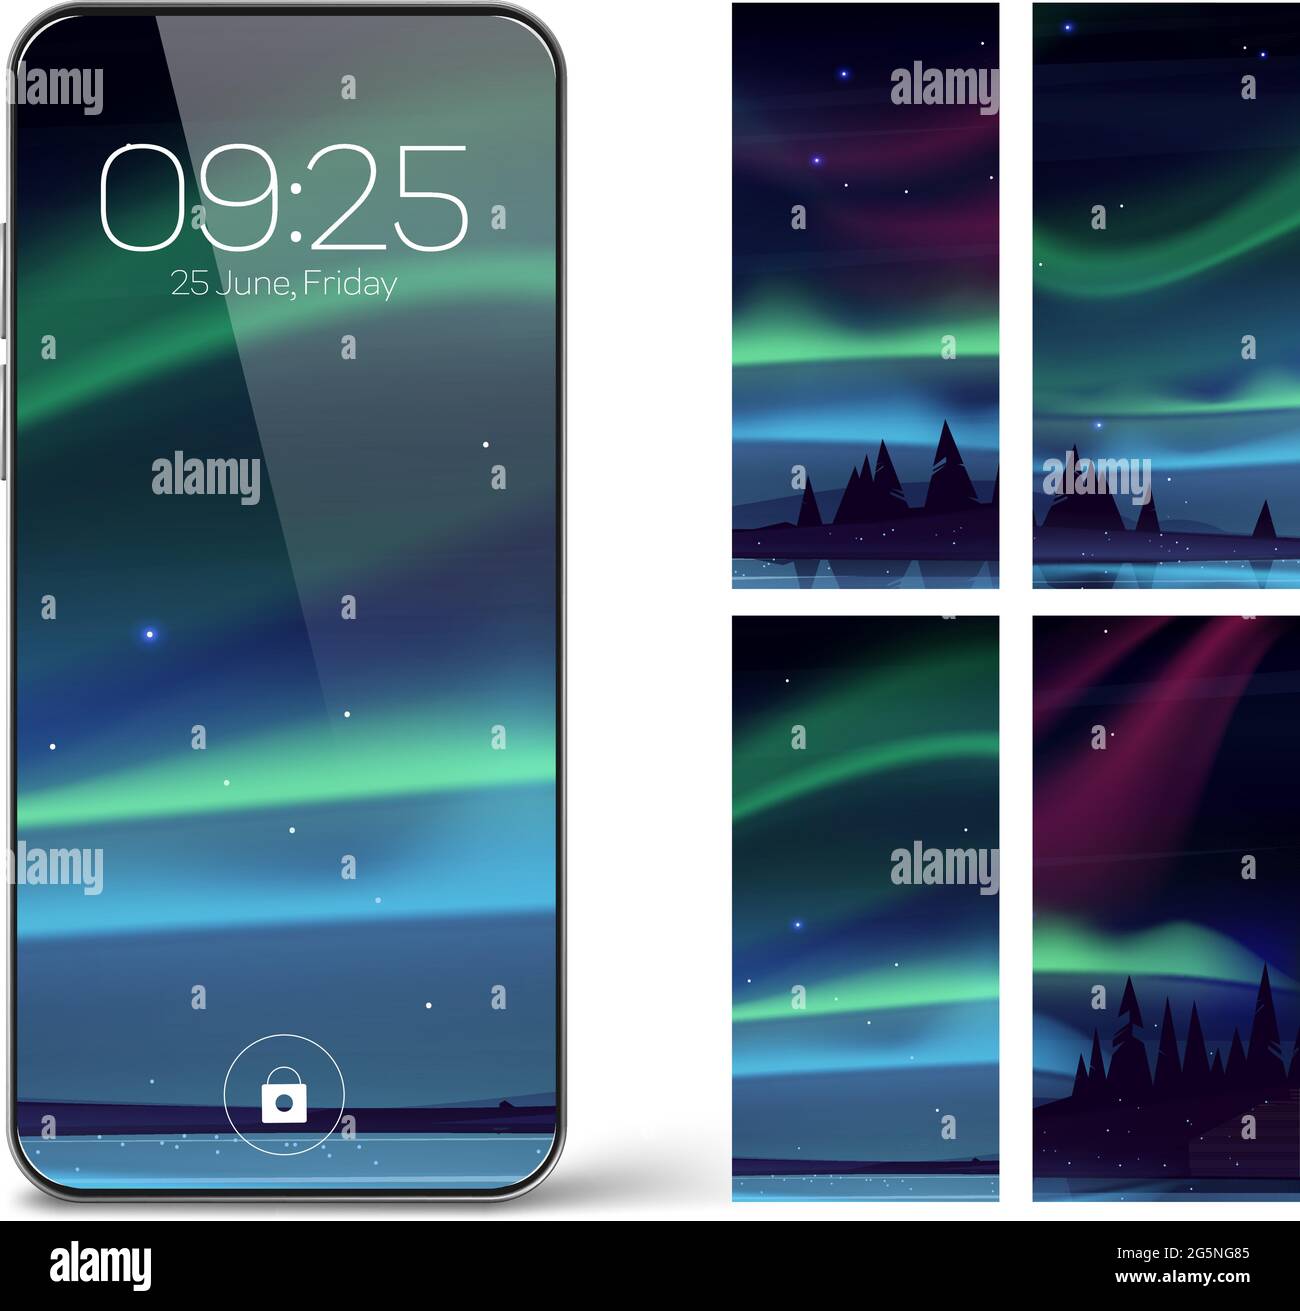 Smartphone lock screen with aurora borealis. Mobile phone onboard page with date and time, northern lights wallpapers background for cellphone device, Cartoon user interface design set Stock Vector